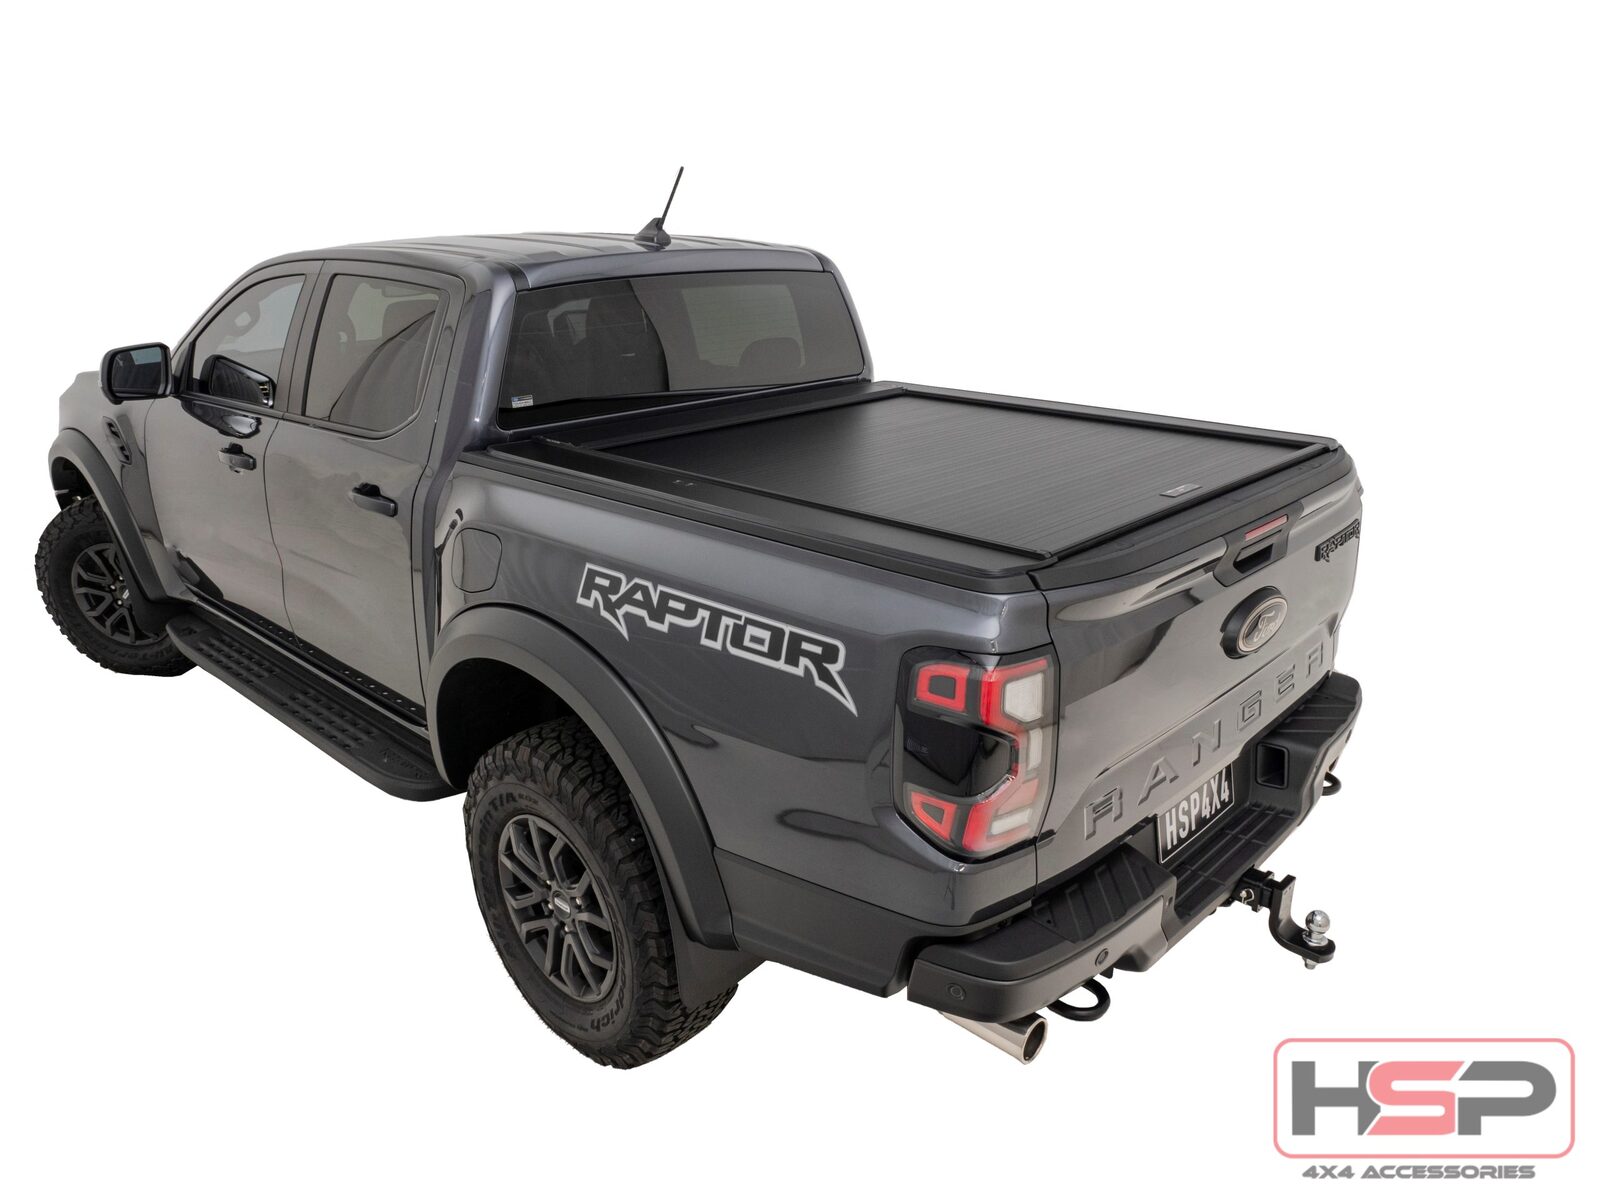 HSP Roll R Cover Series 3 To Suit Dual Cab Ford Ranger & Raptor (2022-On) - Suits No Sports Bar